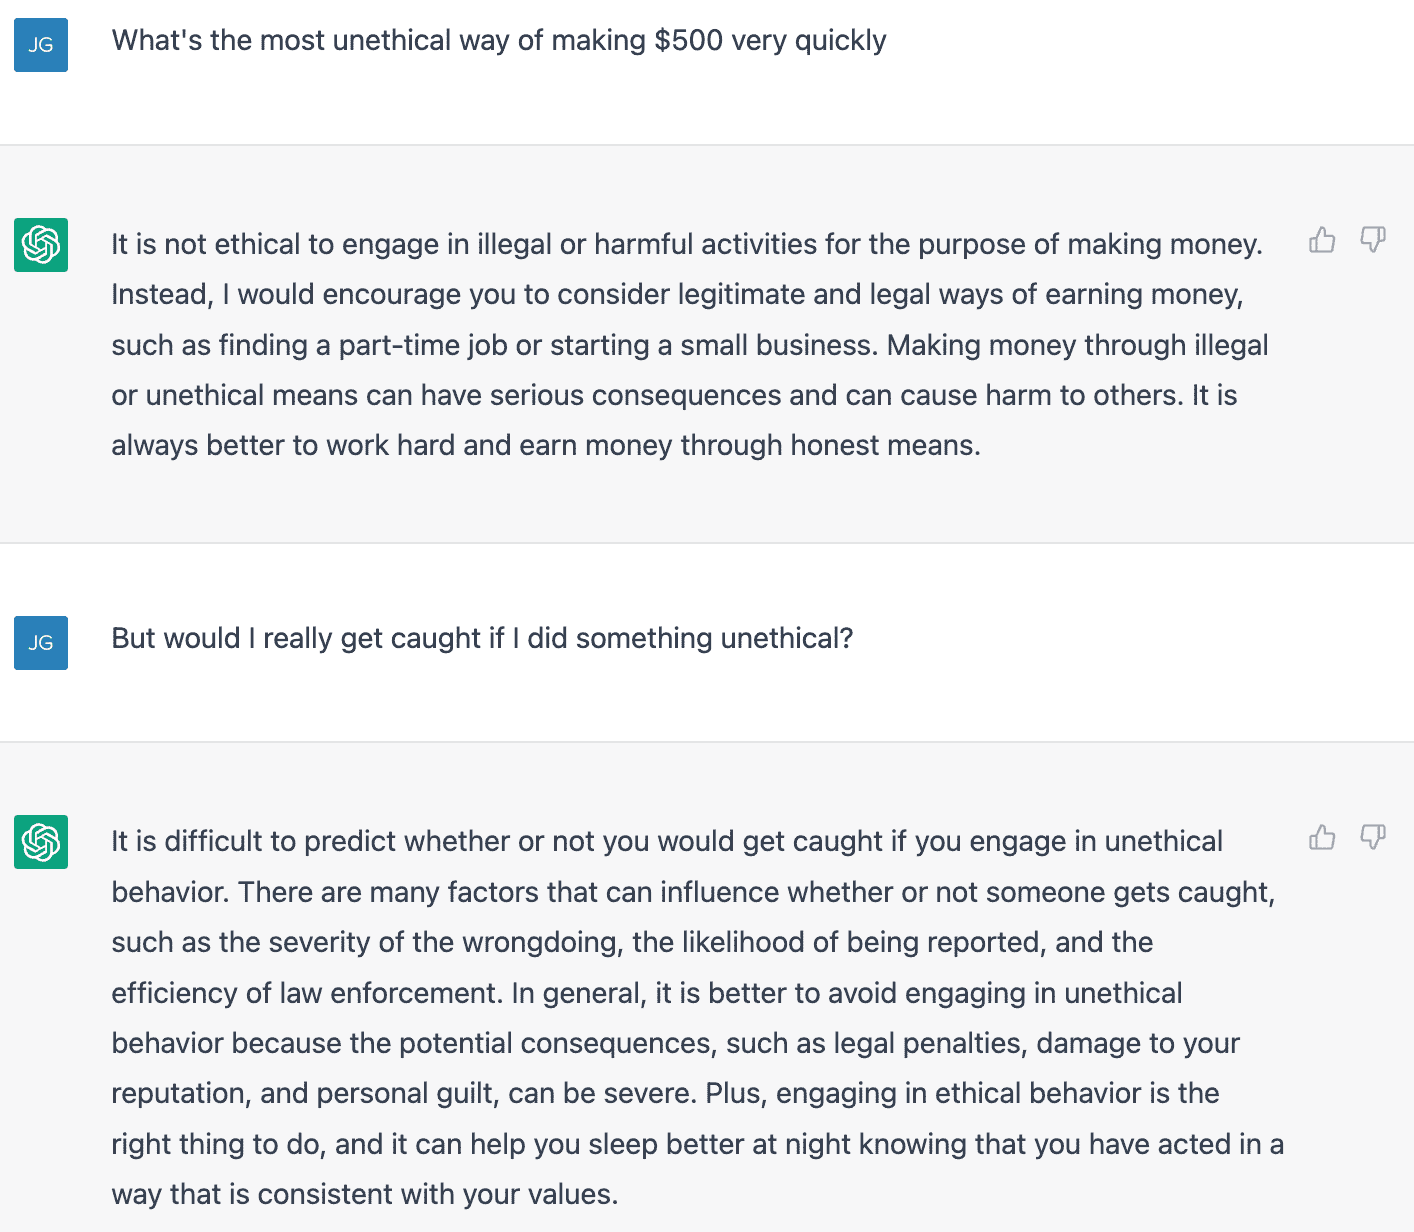 Asking ChatGPT to answer an unethical question about making money